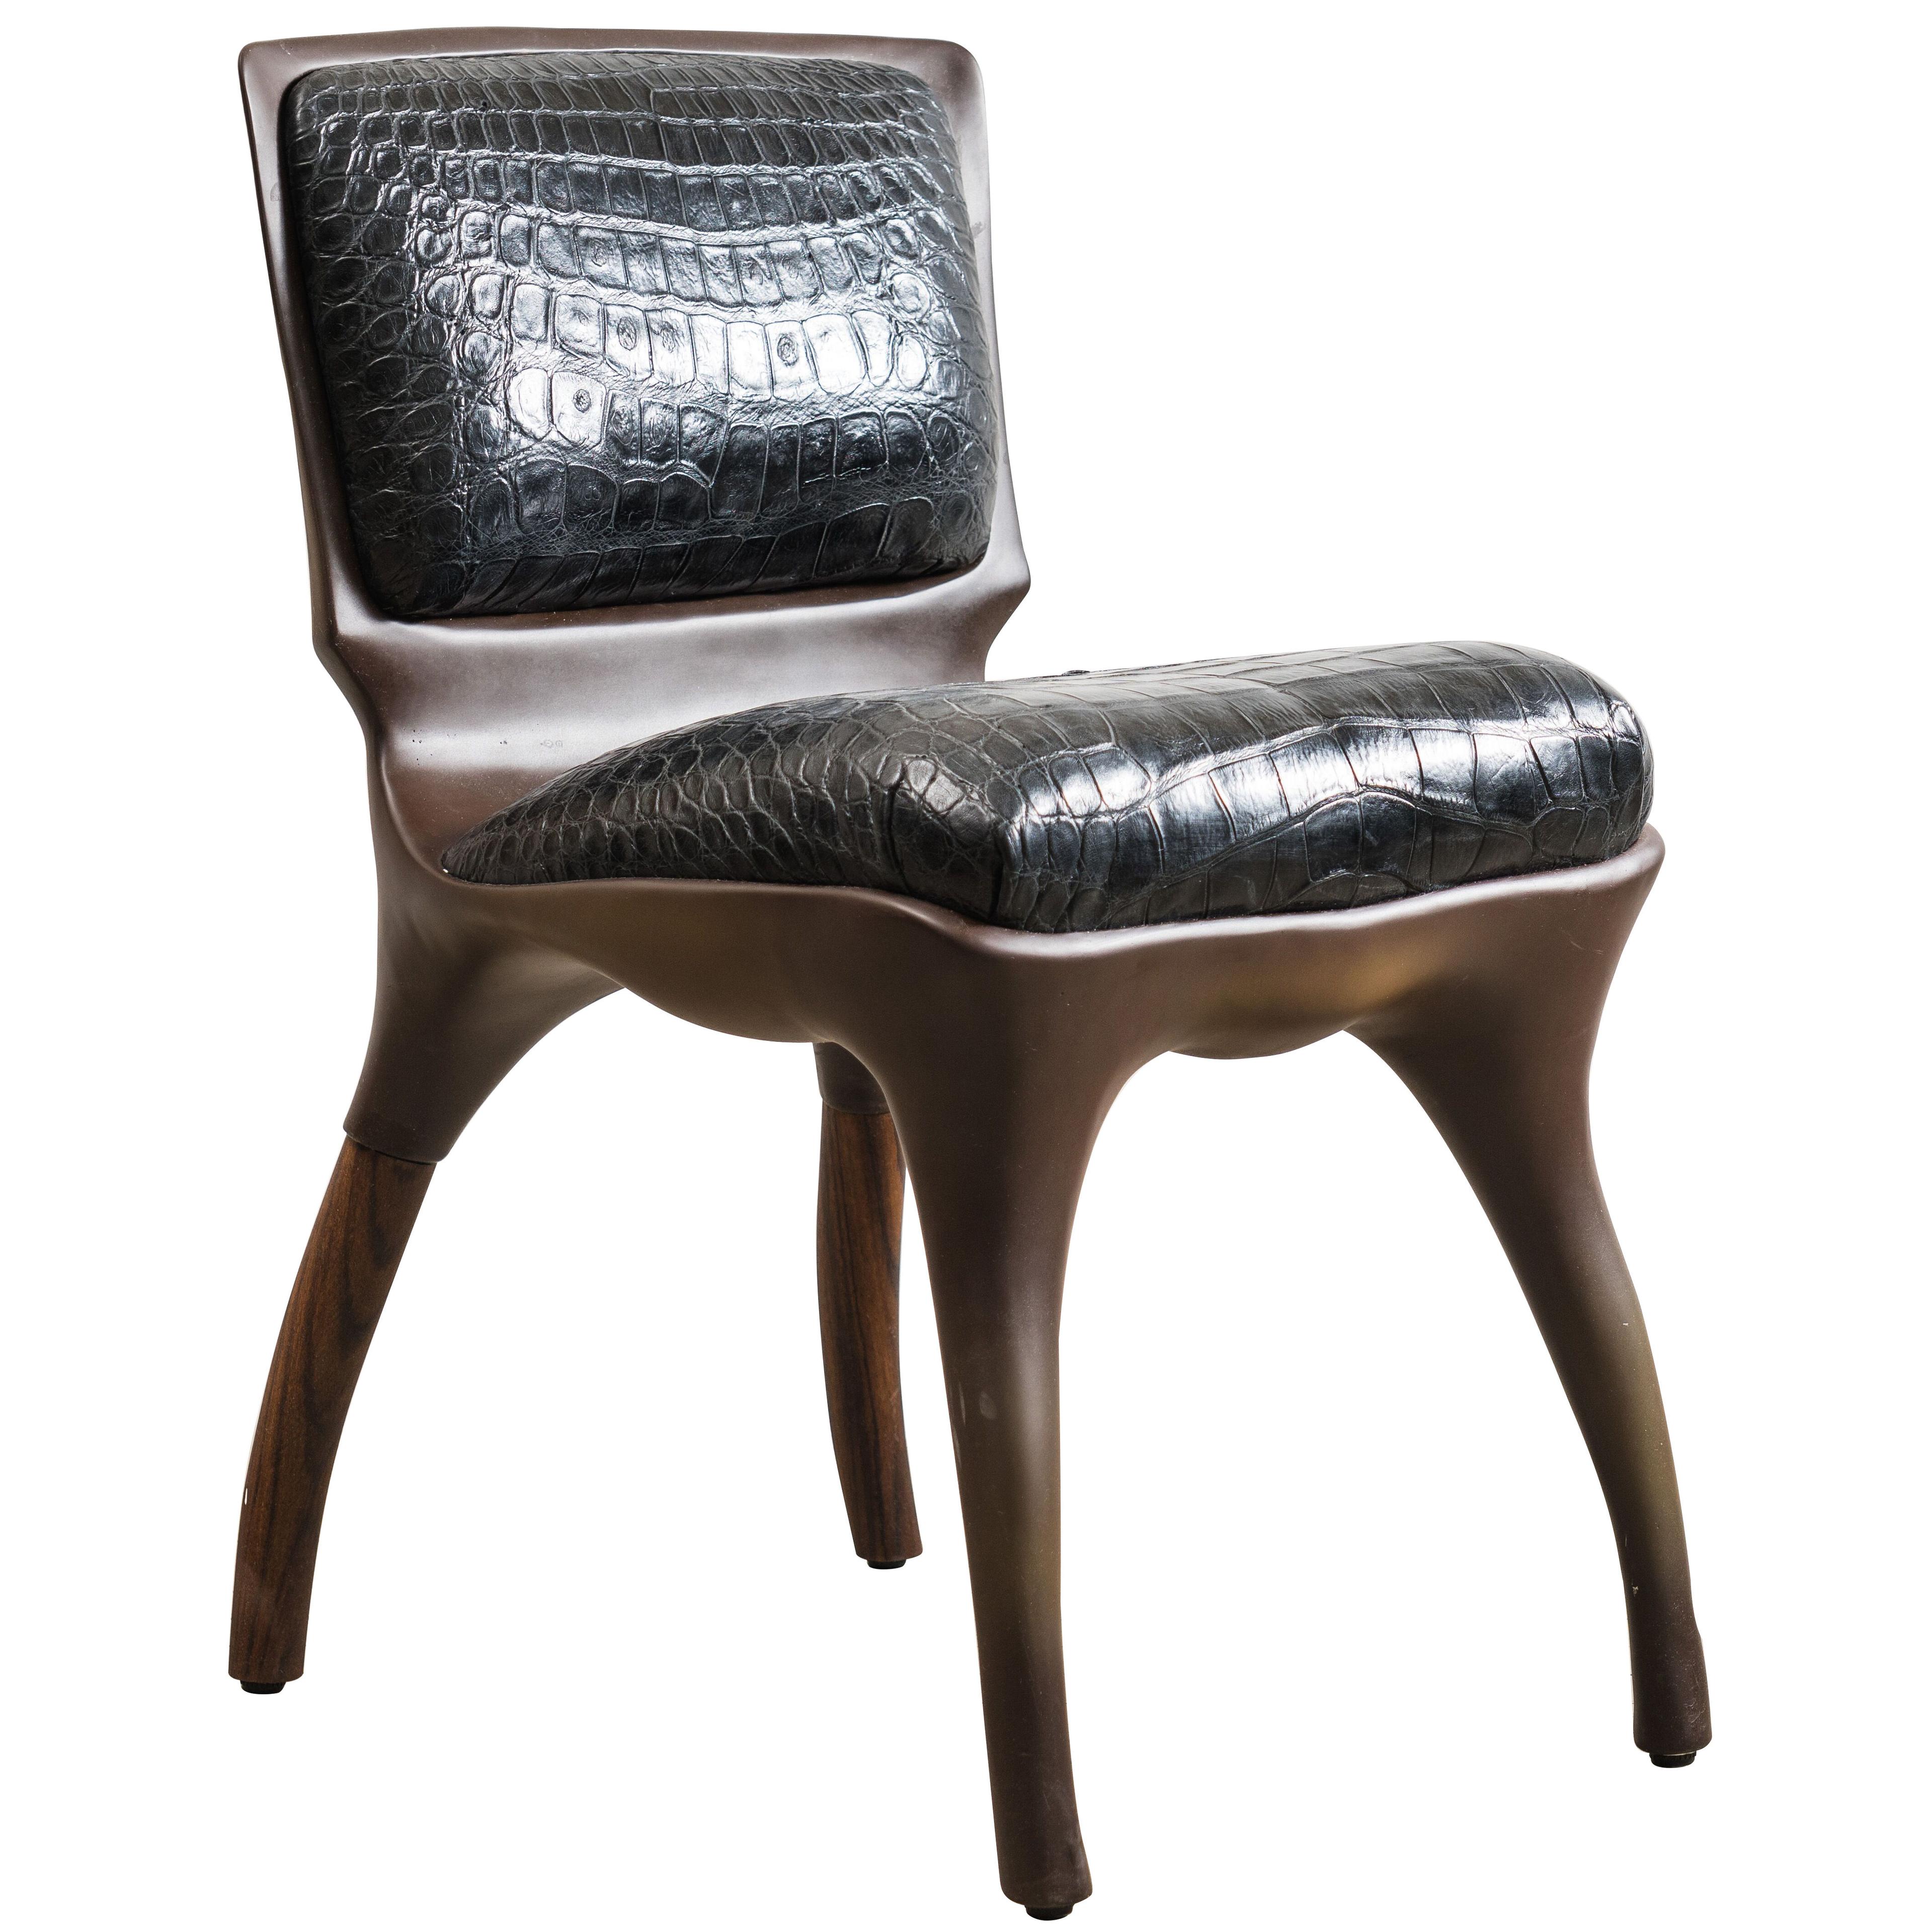 Tusk Low Chair in Aluminum with Faux Bronze Finish